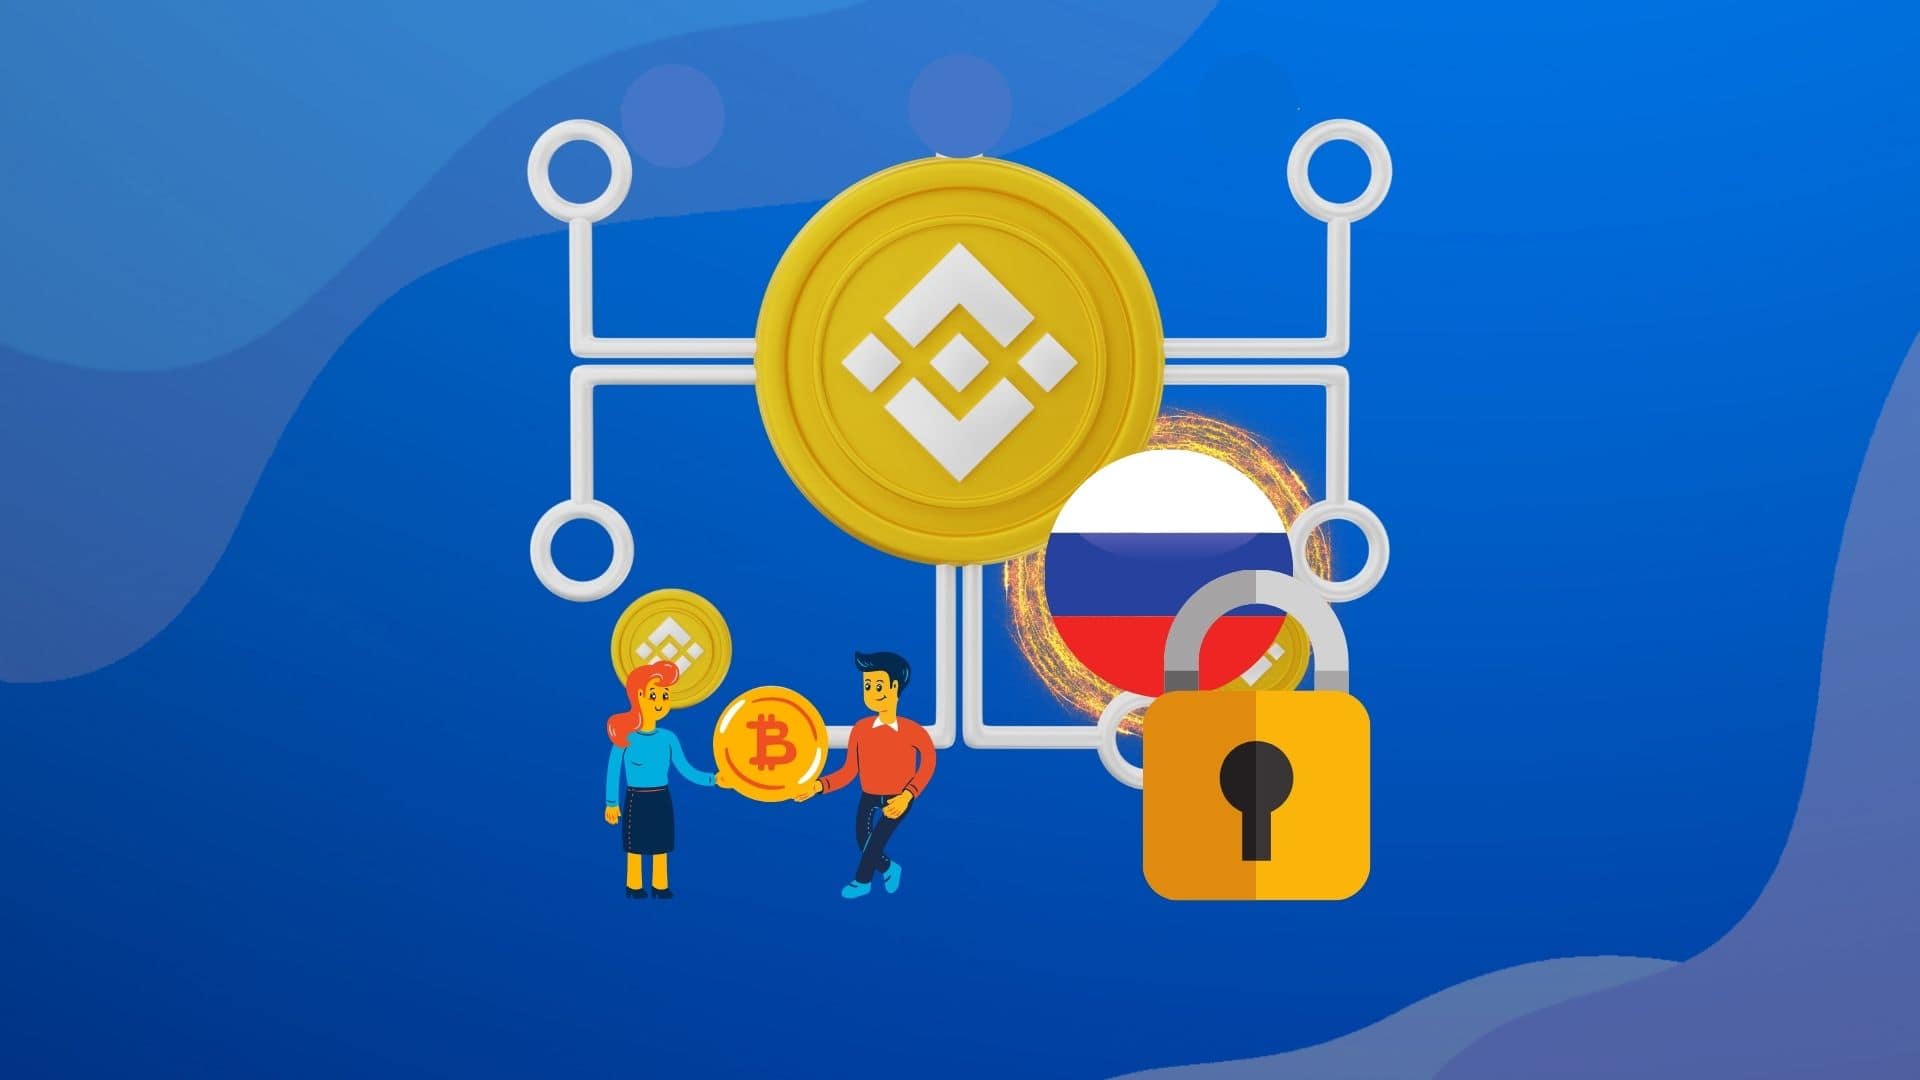 Binance talks about sanctions against Russian users and P2P trading